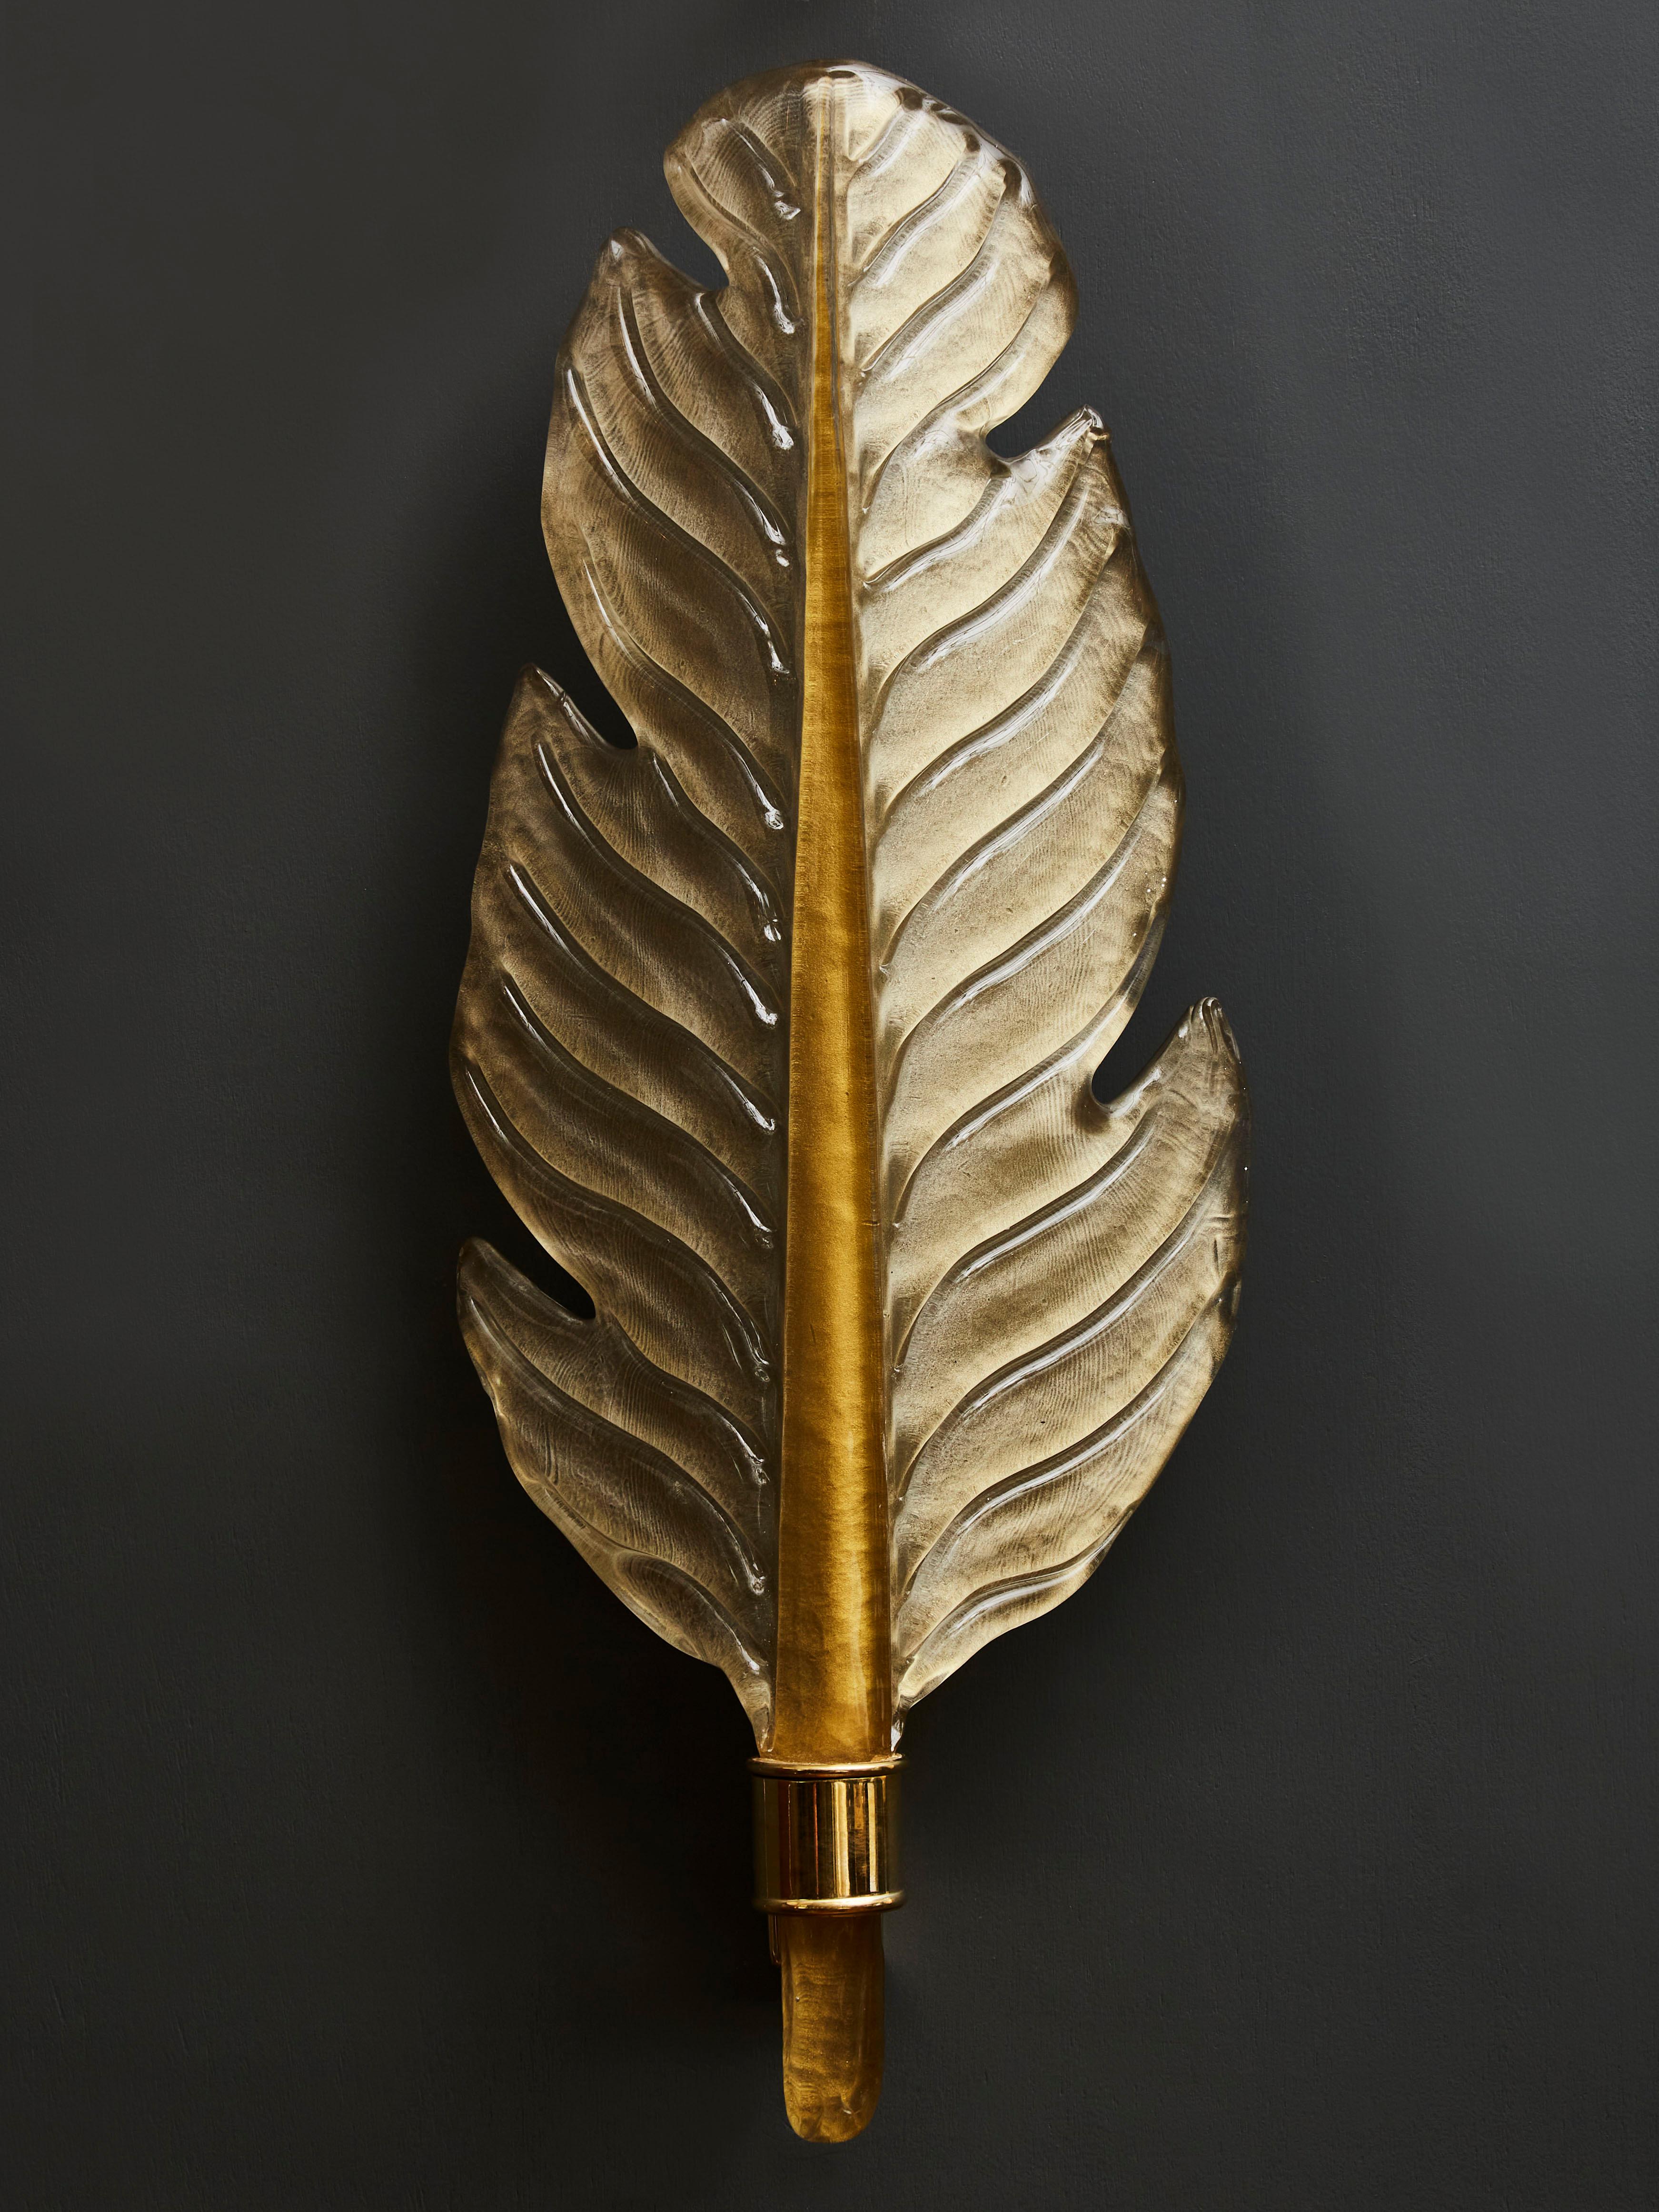 Pair of wall sconces made of tinted Murano glass and shaped like big leaves. Brass setting at the stem, holding one light per sconce.